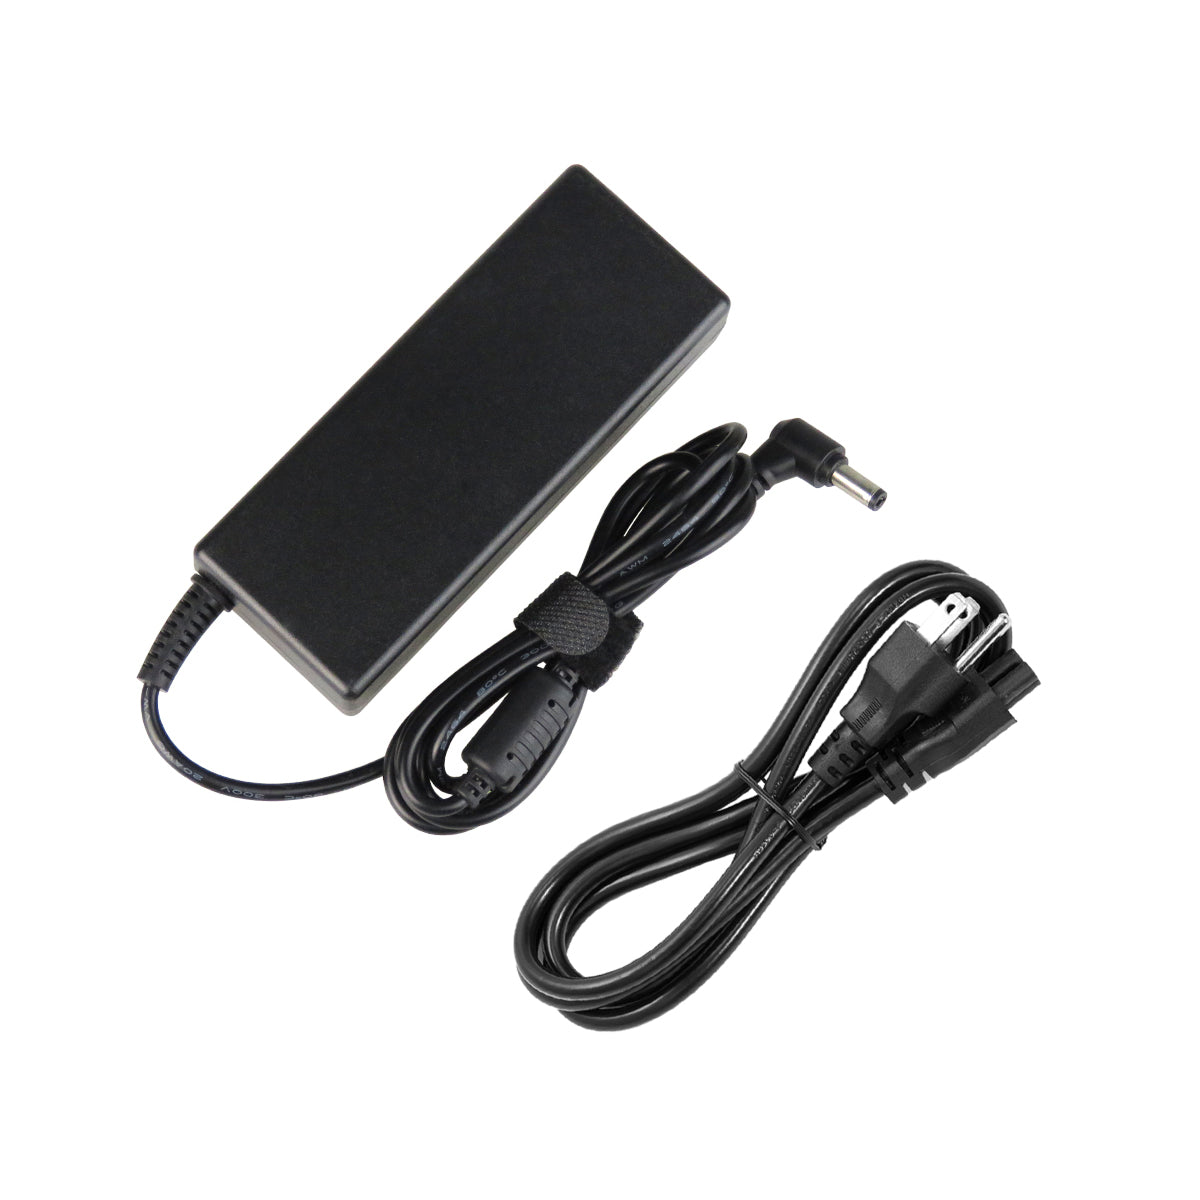 AC Adapter Charger for ASUS F83T Notebook.